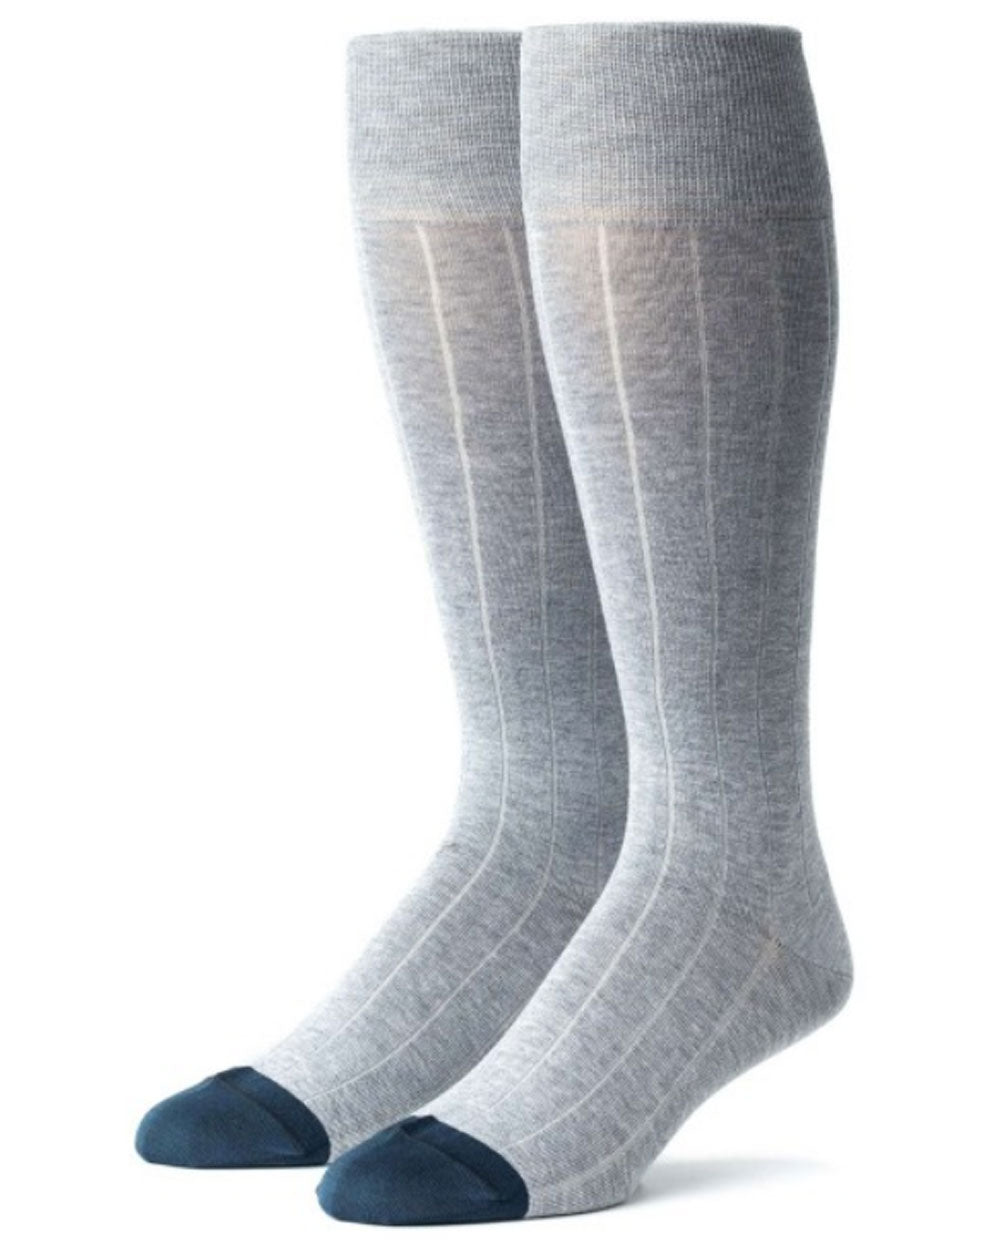 Ribbed 18X2 Over the Calf Socks in Grey and Blue